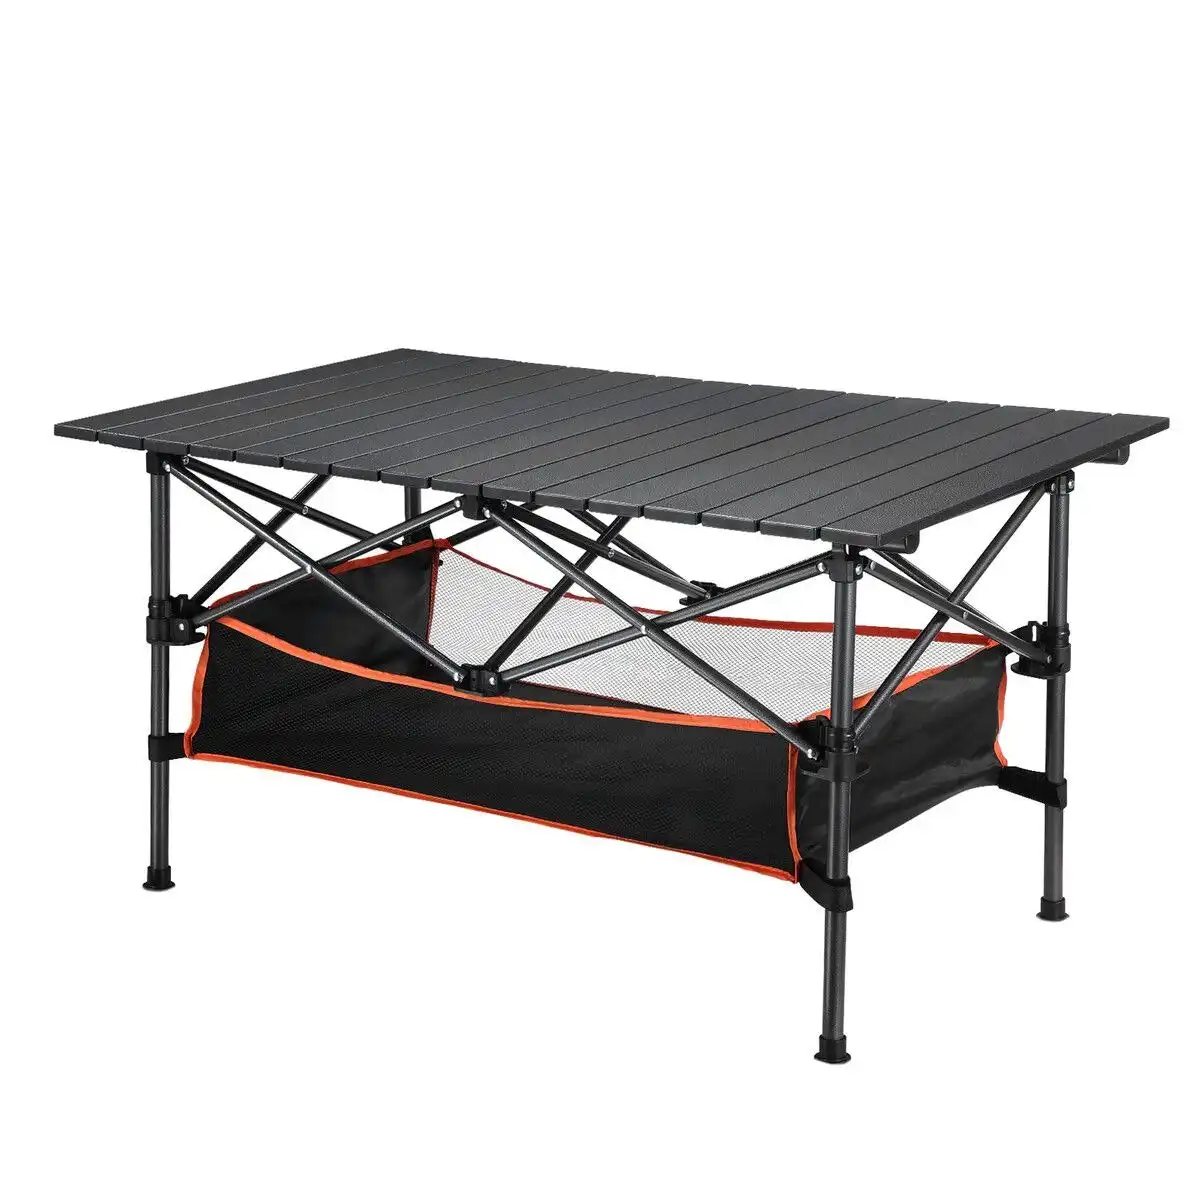 OGL Portable Folding Camping Table Picnic Outdoor Foldable Desk Aluminium with Storage Carry Bag